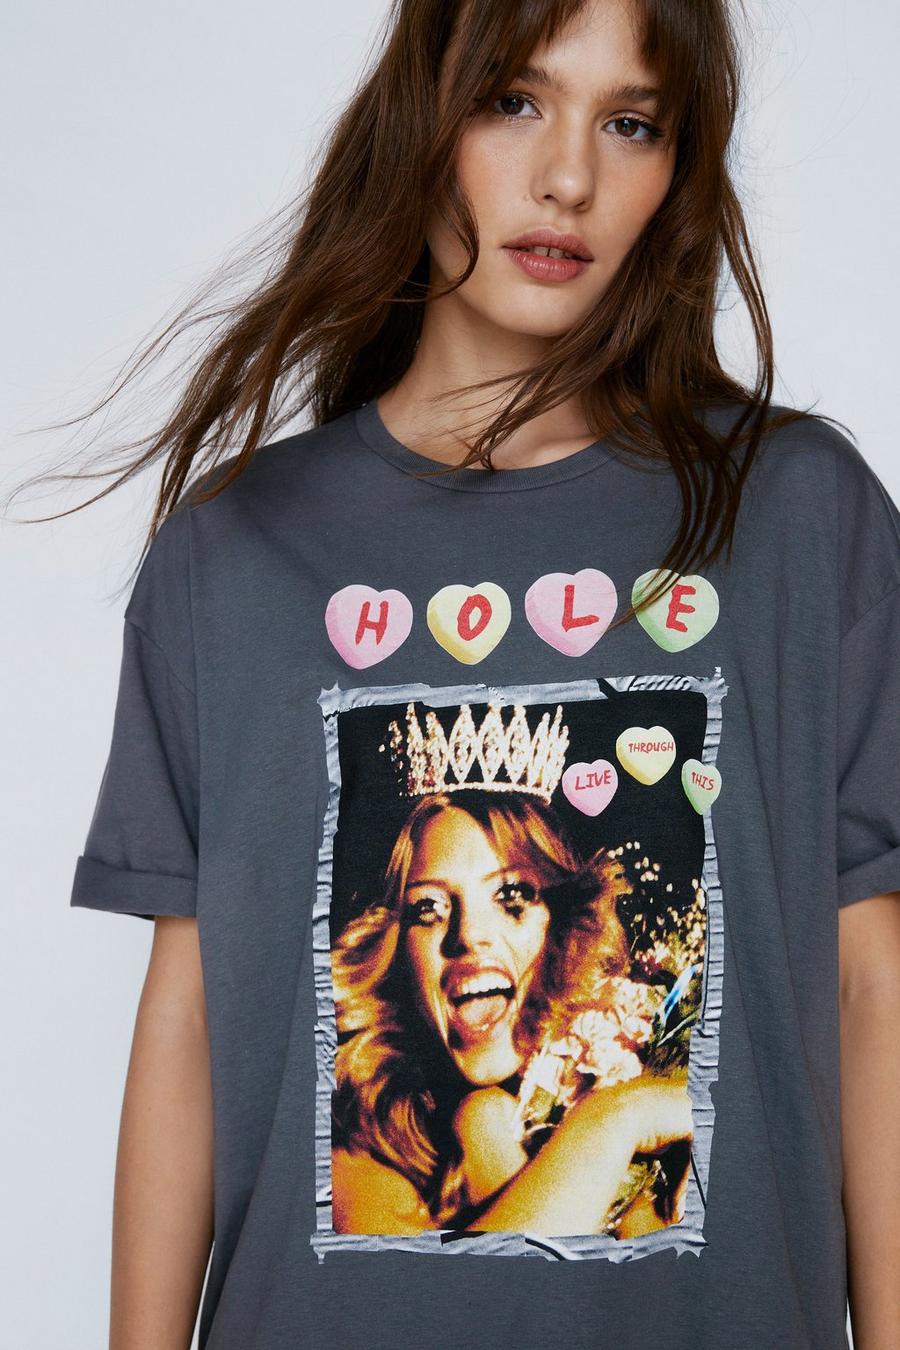 Hole Graphic Band T-shirt